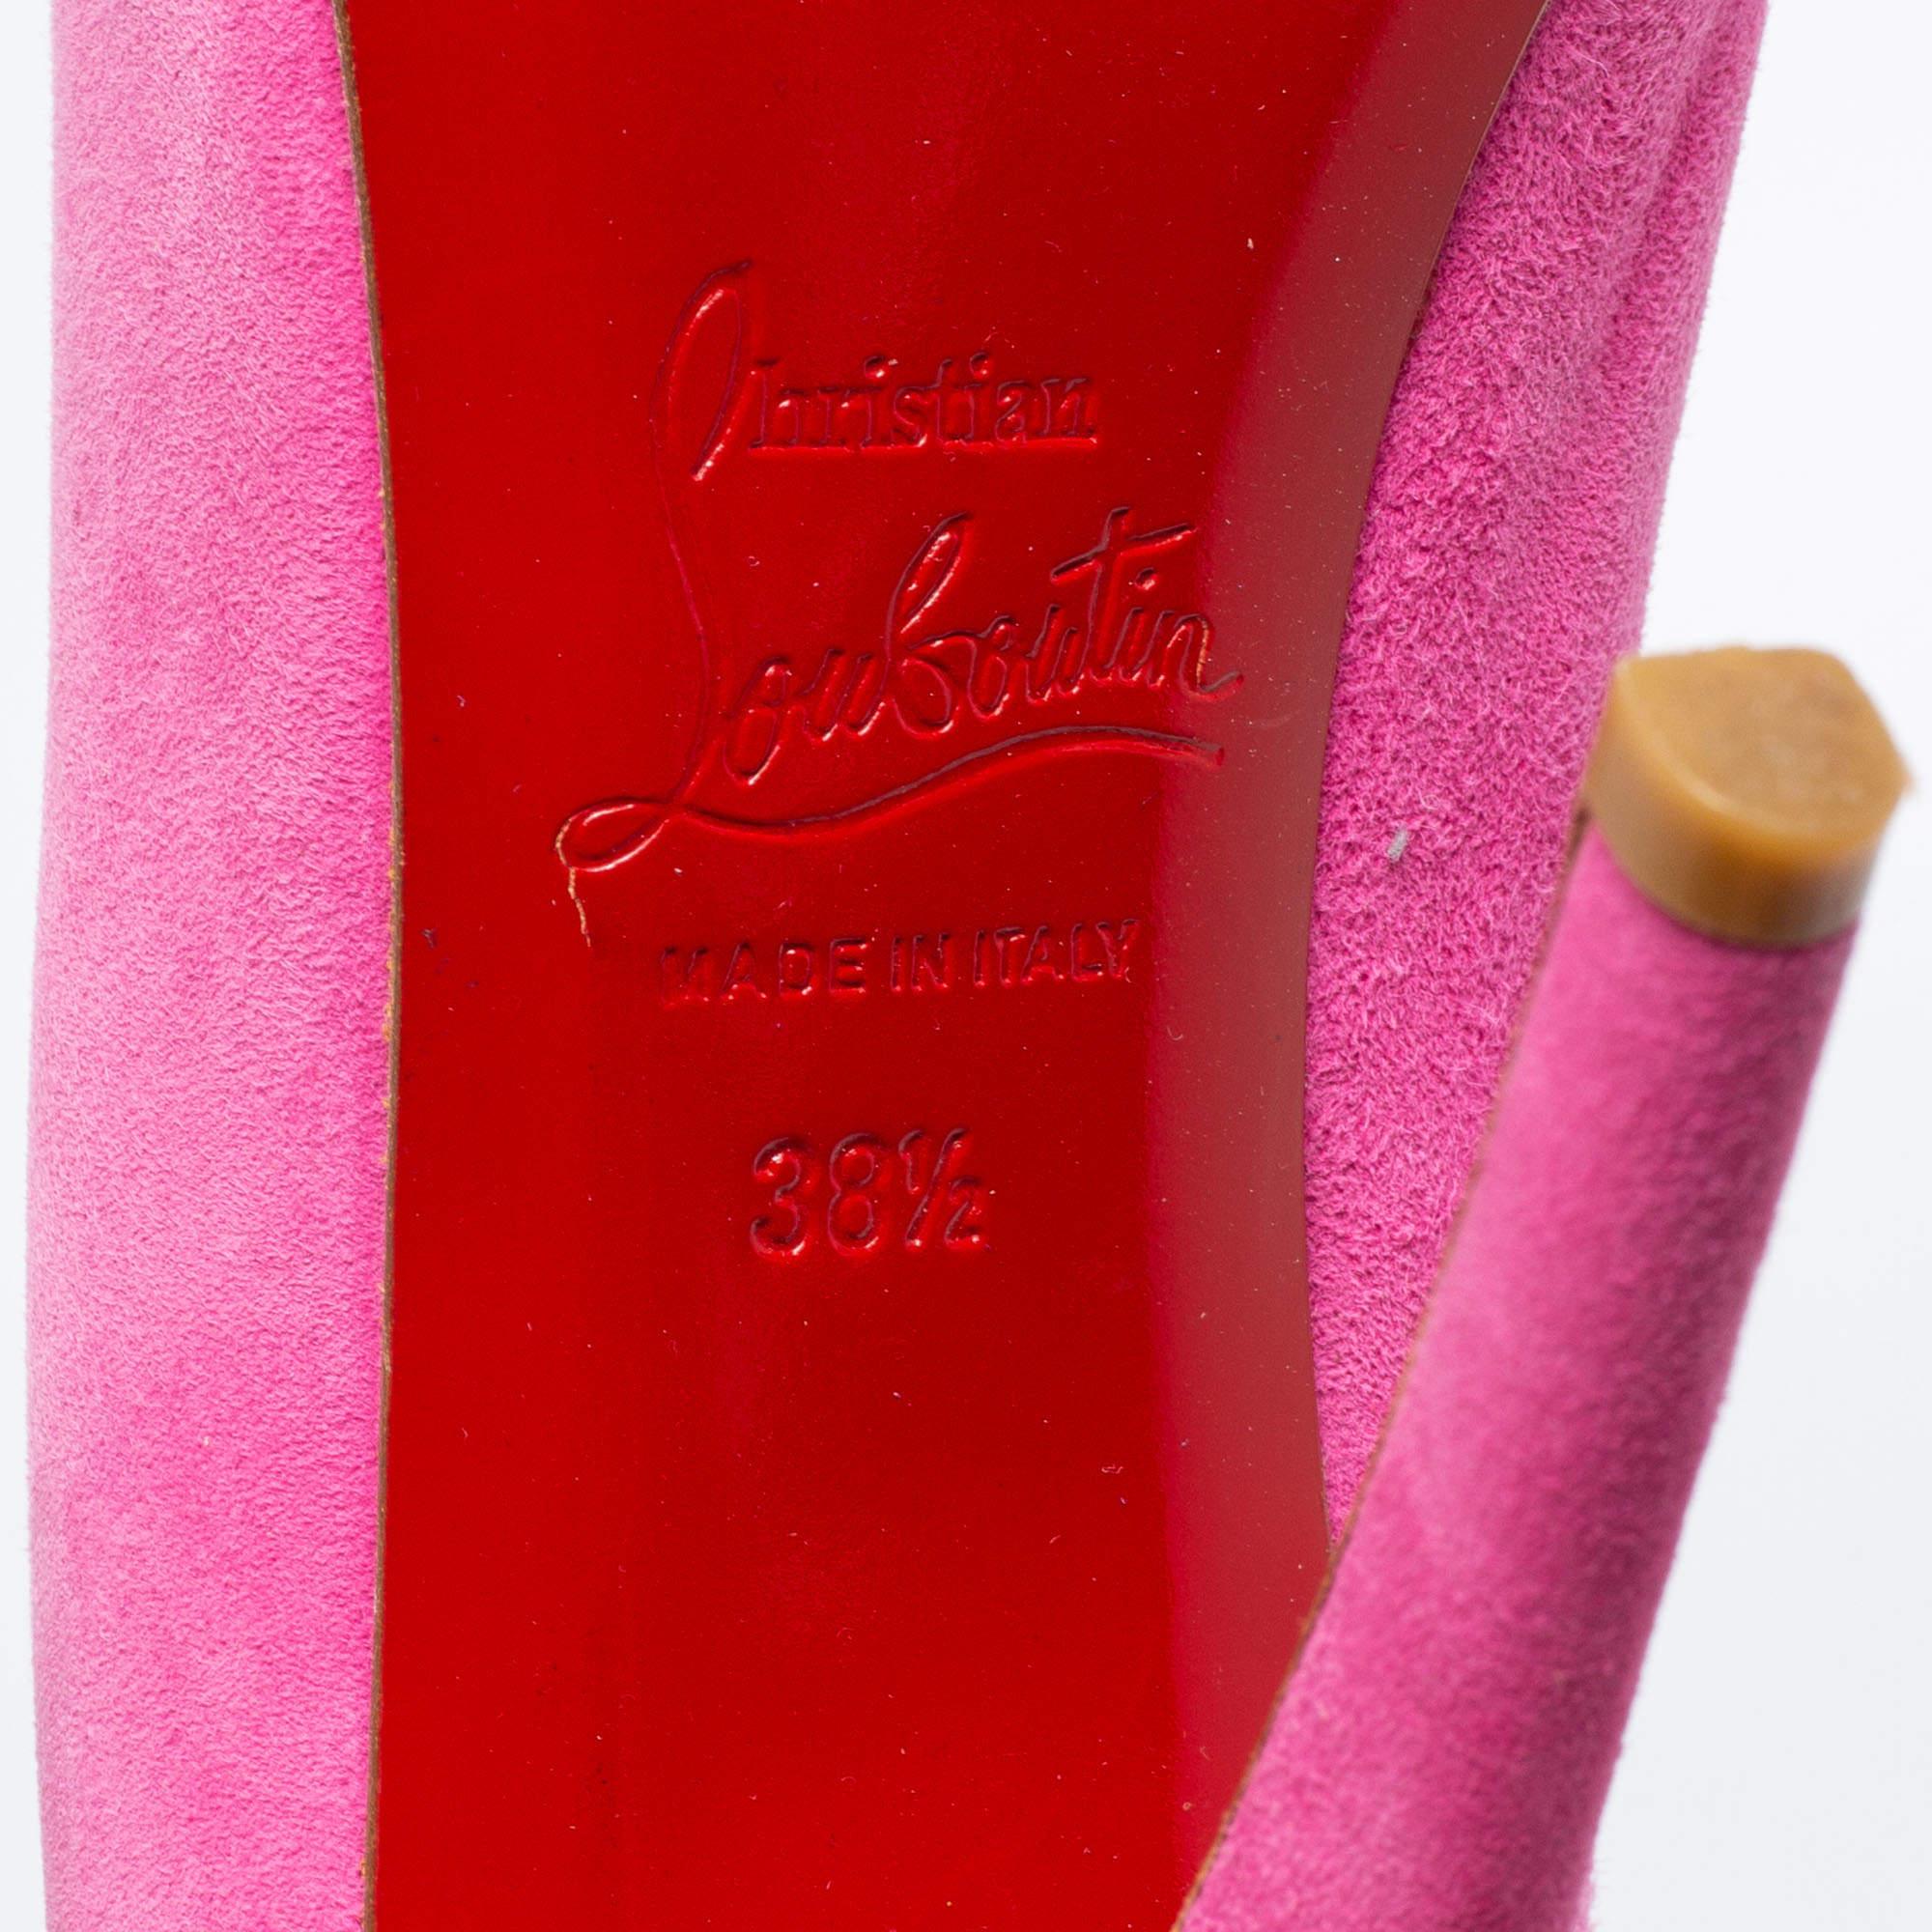 Christian Louboutin Pink Suede Elisa Pumps Size 38.5 For Sale 3